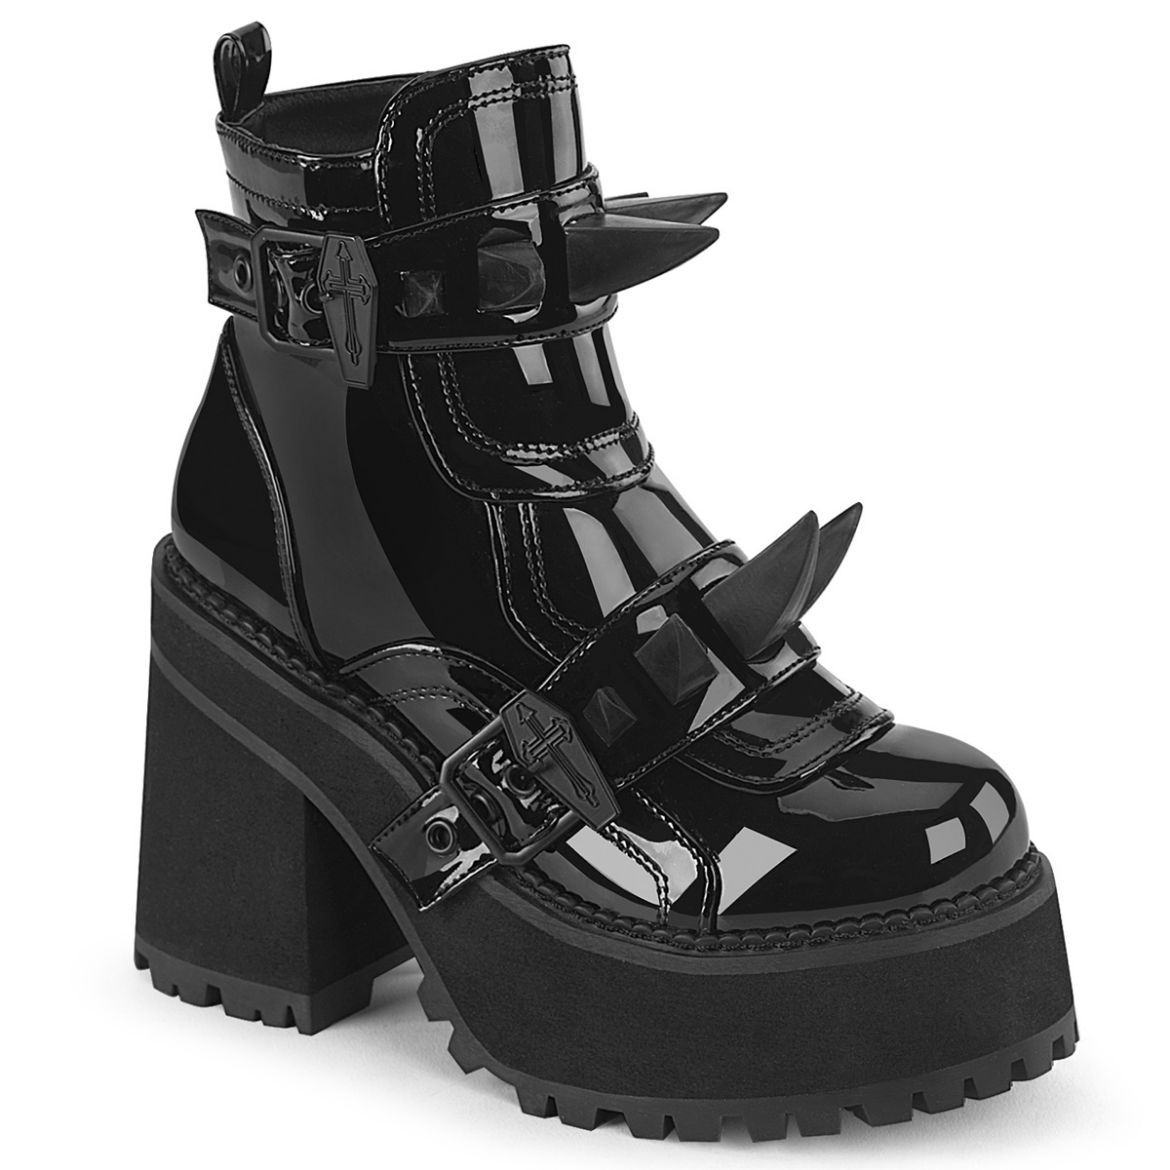 Product image of Demoniacult ASSAULT-72 Blk Pat 4 3/4 Inch Heel 2 1/4 Inch PF Ankle Boot Inside Zip